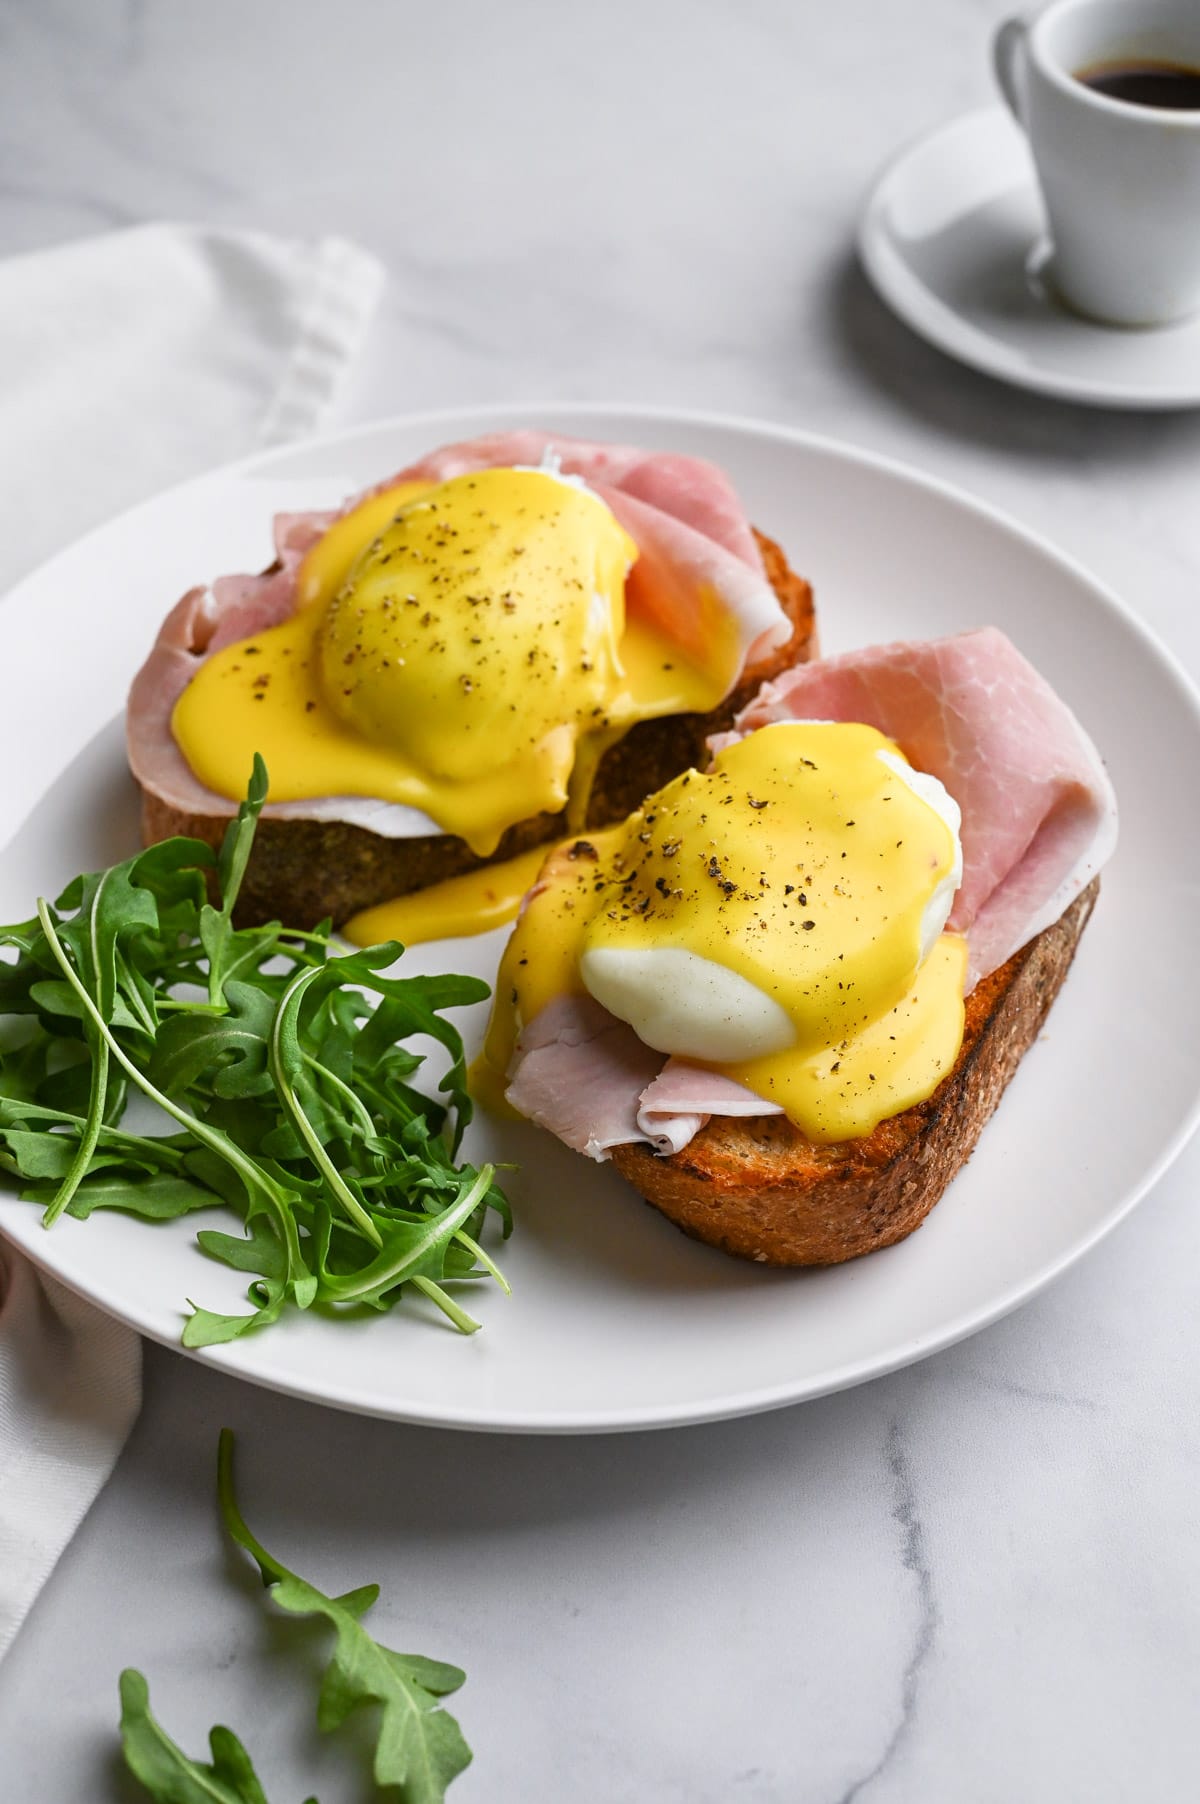 Angled view of toast topped with Italian ham, poached eggs and hollandaise sauce with arugula on the side on a marble surface.